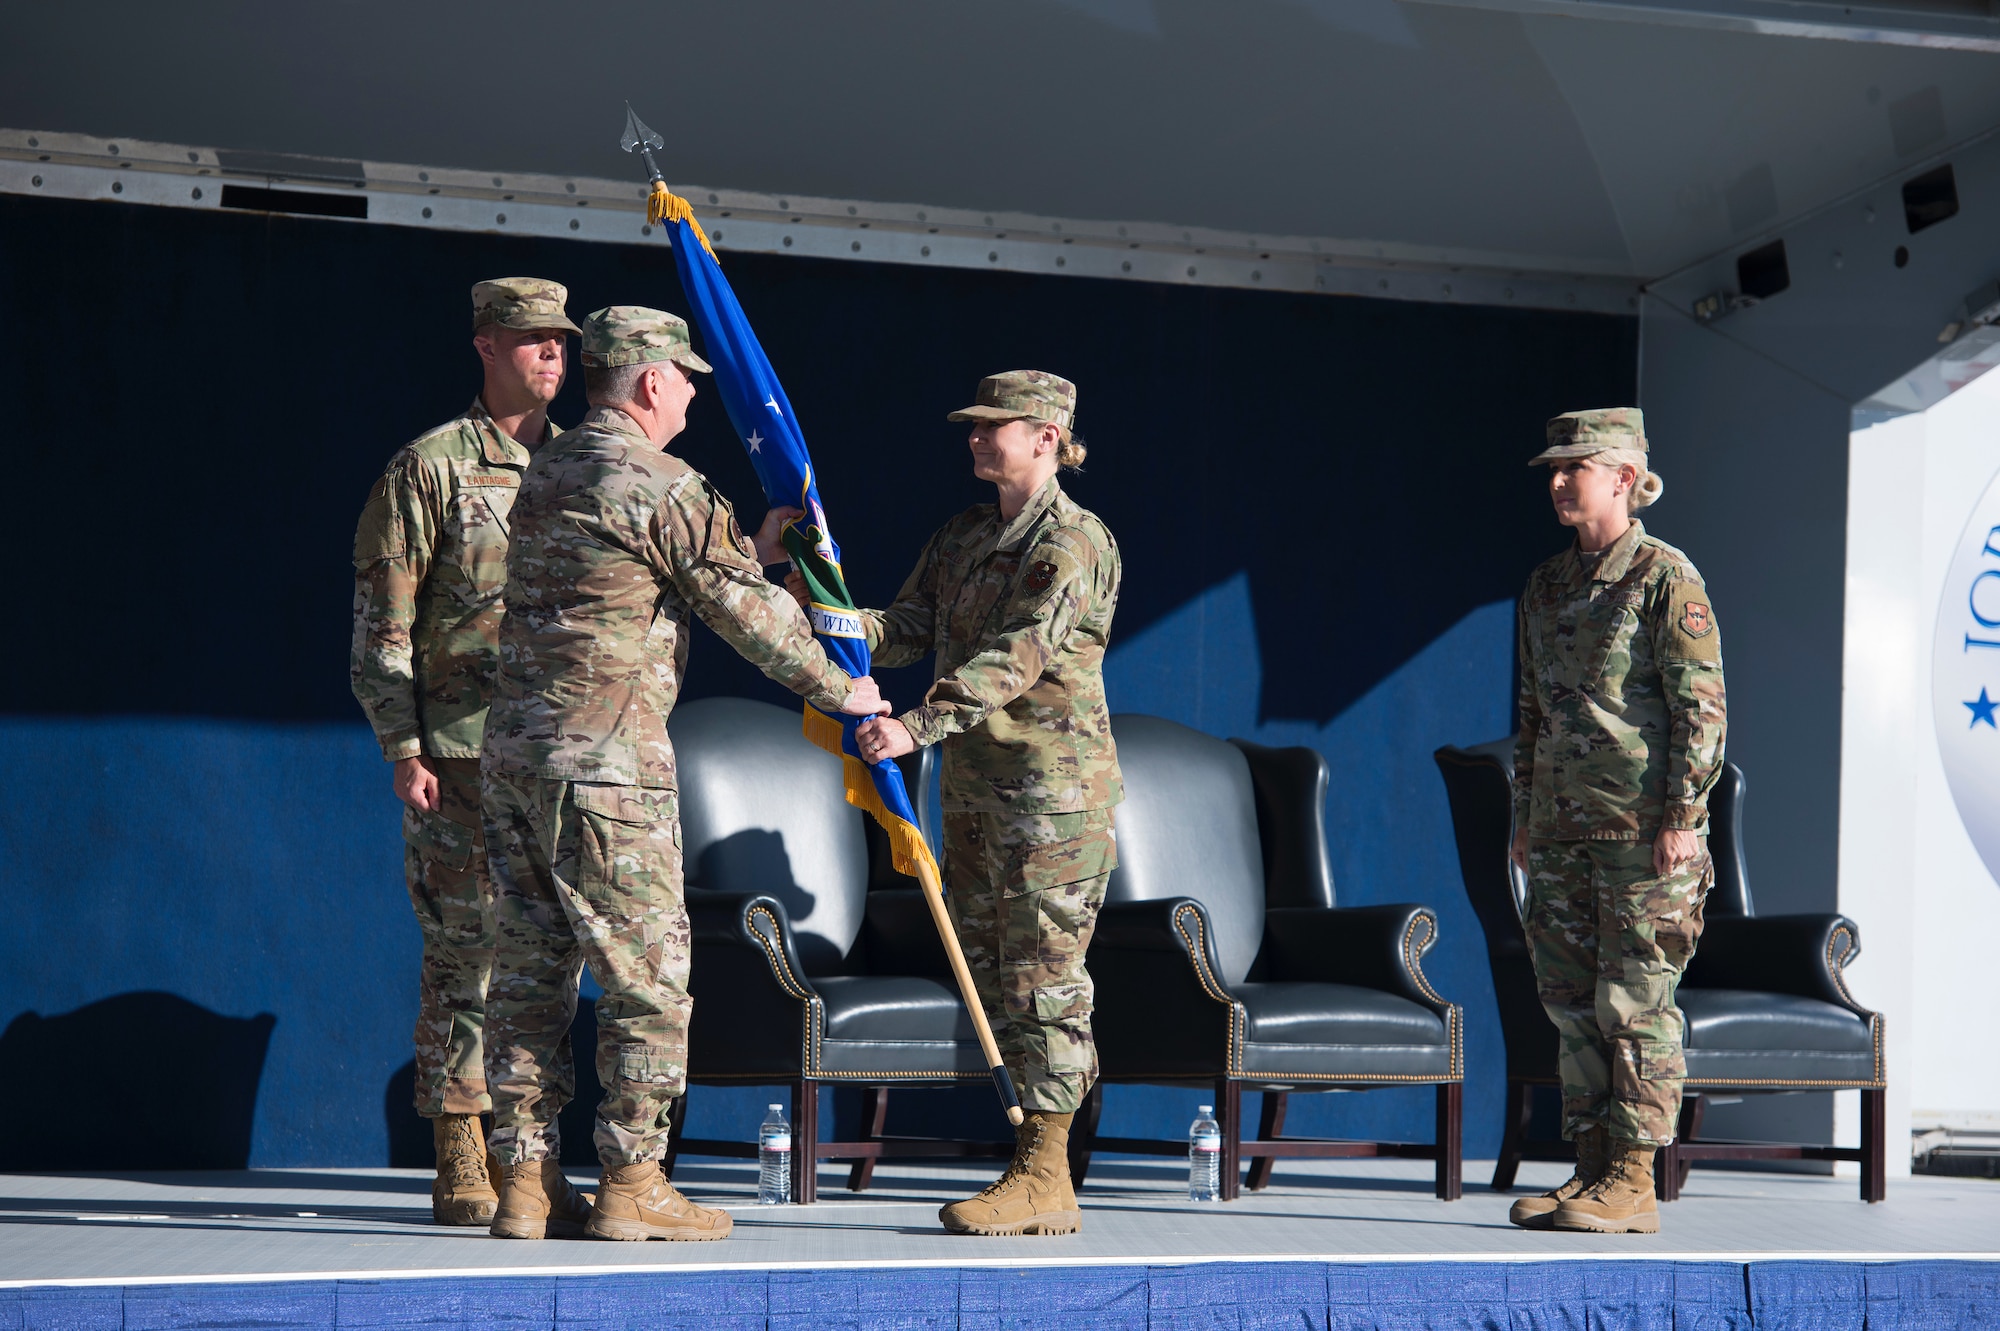 Lt. Gen. Brad Webb, the Air Education and Training Command commander, passes the 502d Air Base Wing colors to Brig. Gen. Caroline Miller, the newest commander of the wing and Joint Base San Antonio during a modified ceremony June 12 at JBSA-Fort Sam Houston, Texas.